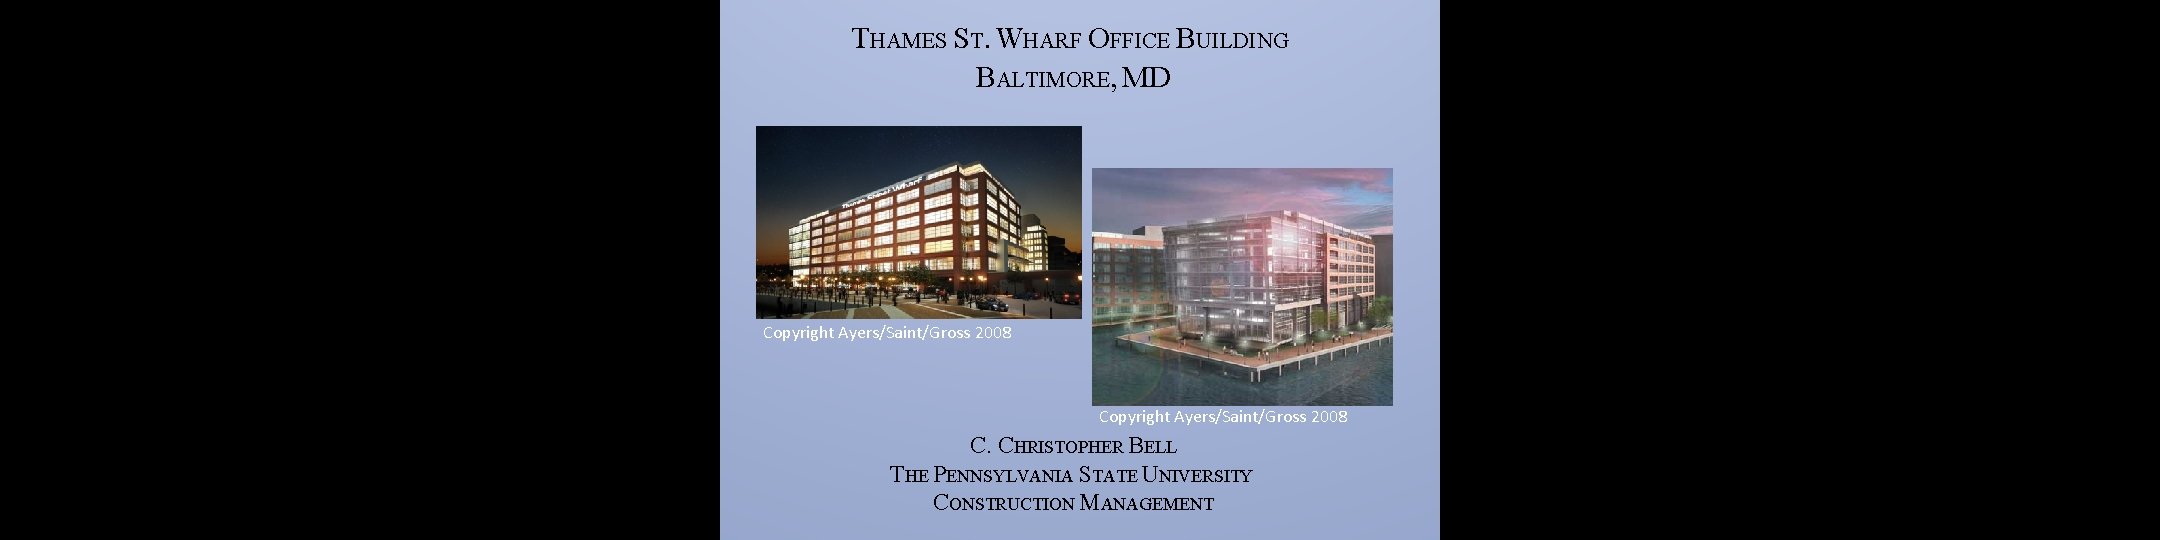 THAMES ST. WHARF OFFICE BUILDING BALTIMORE, MD Copyright Ayers/Saint/Gross 2008 C. CHRISTOPHER BELL THE